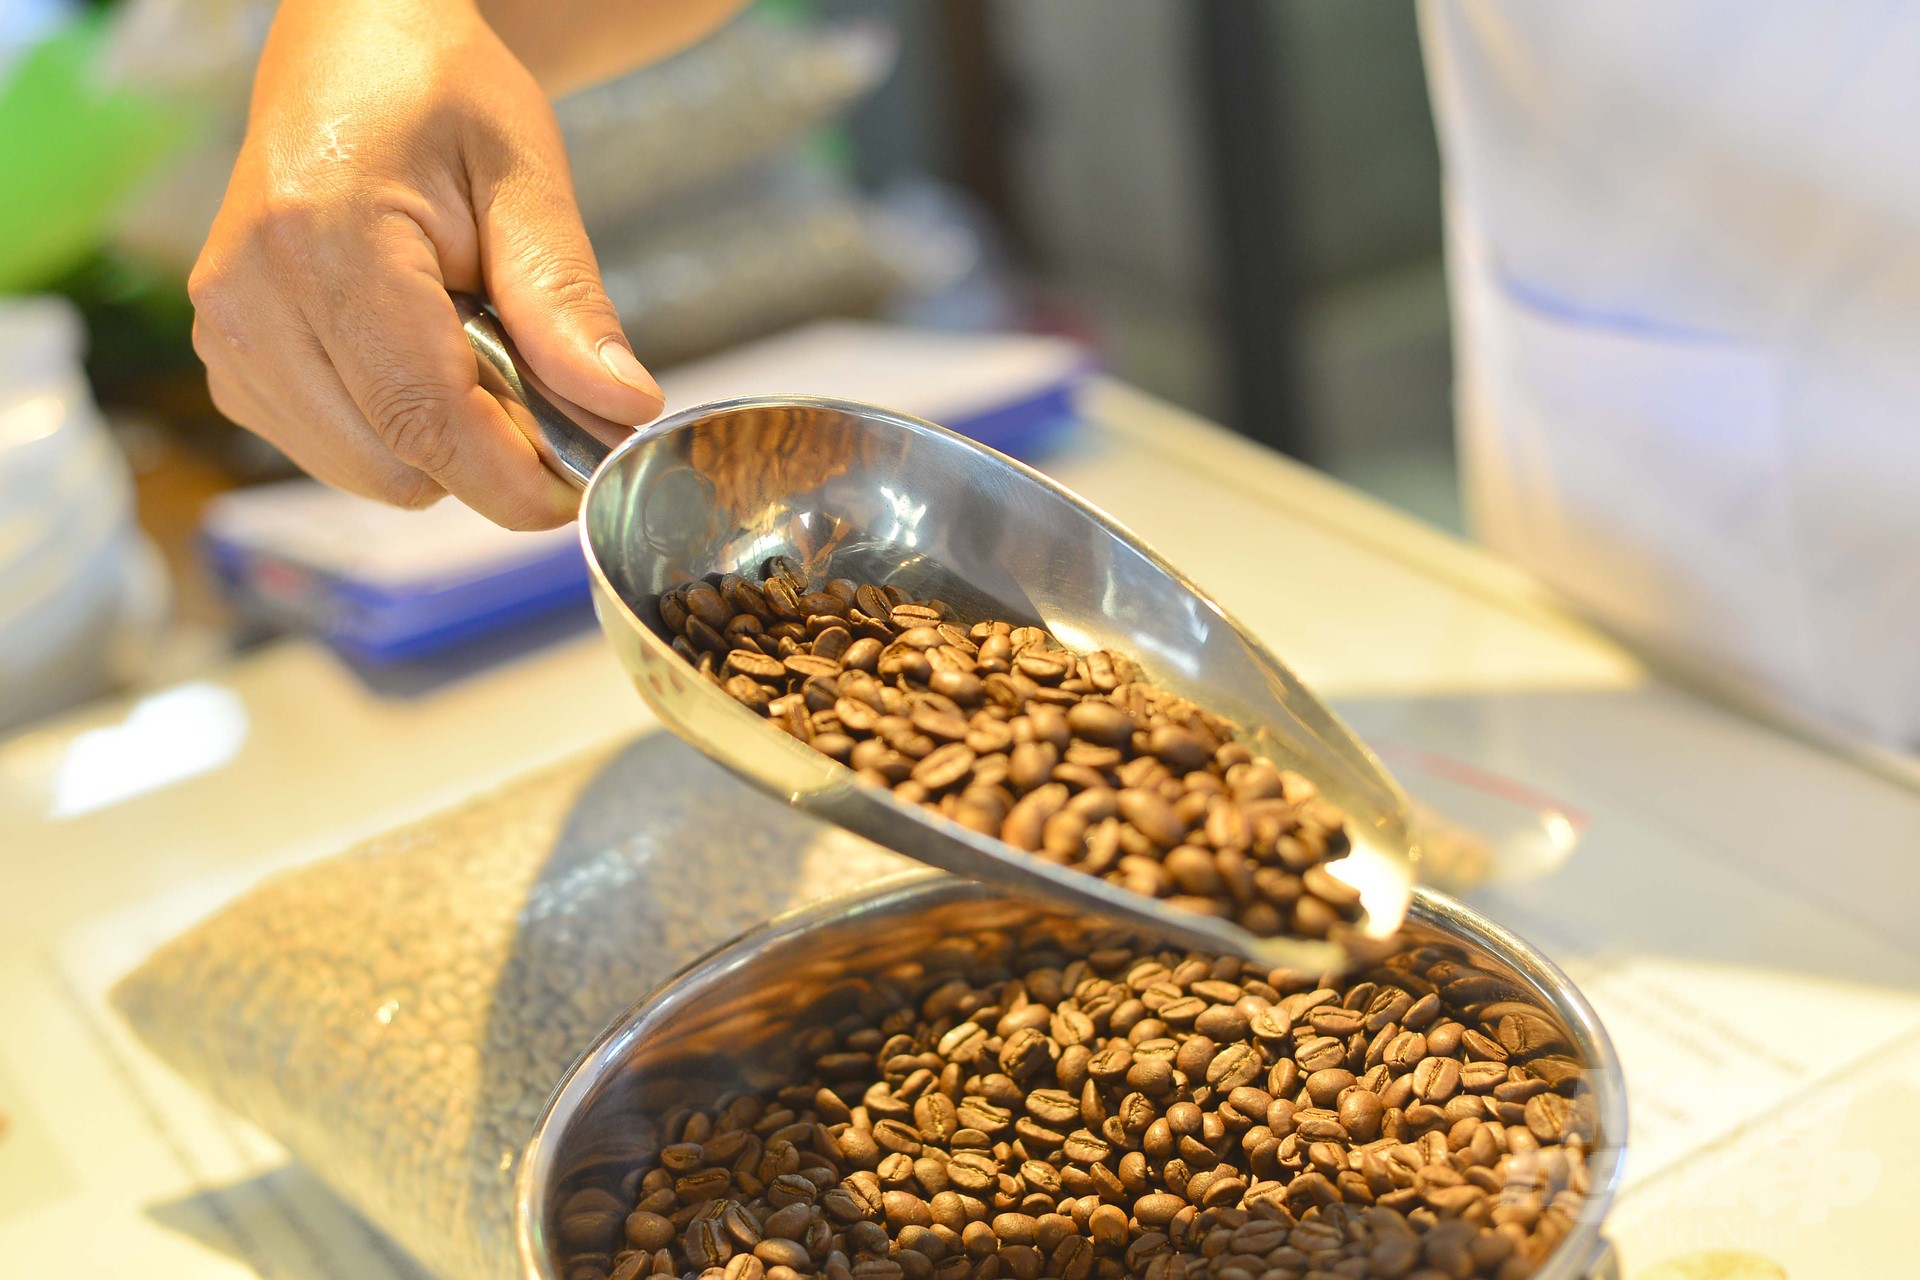 Currently, people and enterprises producing coffee are gradually focusing on improving quality to meet market demand. Photo: Minh Hau.